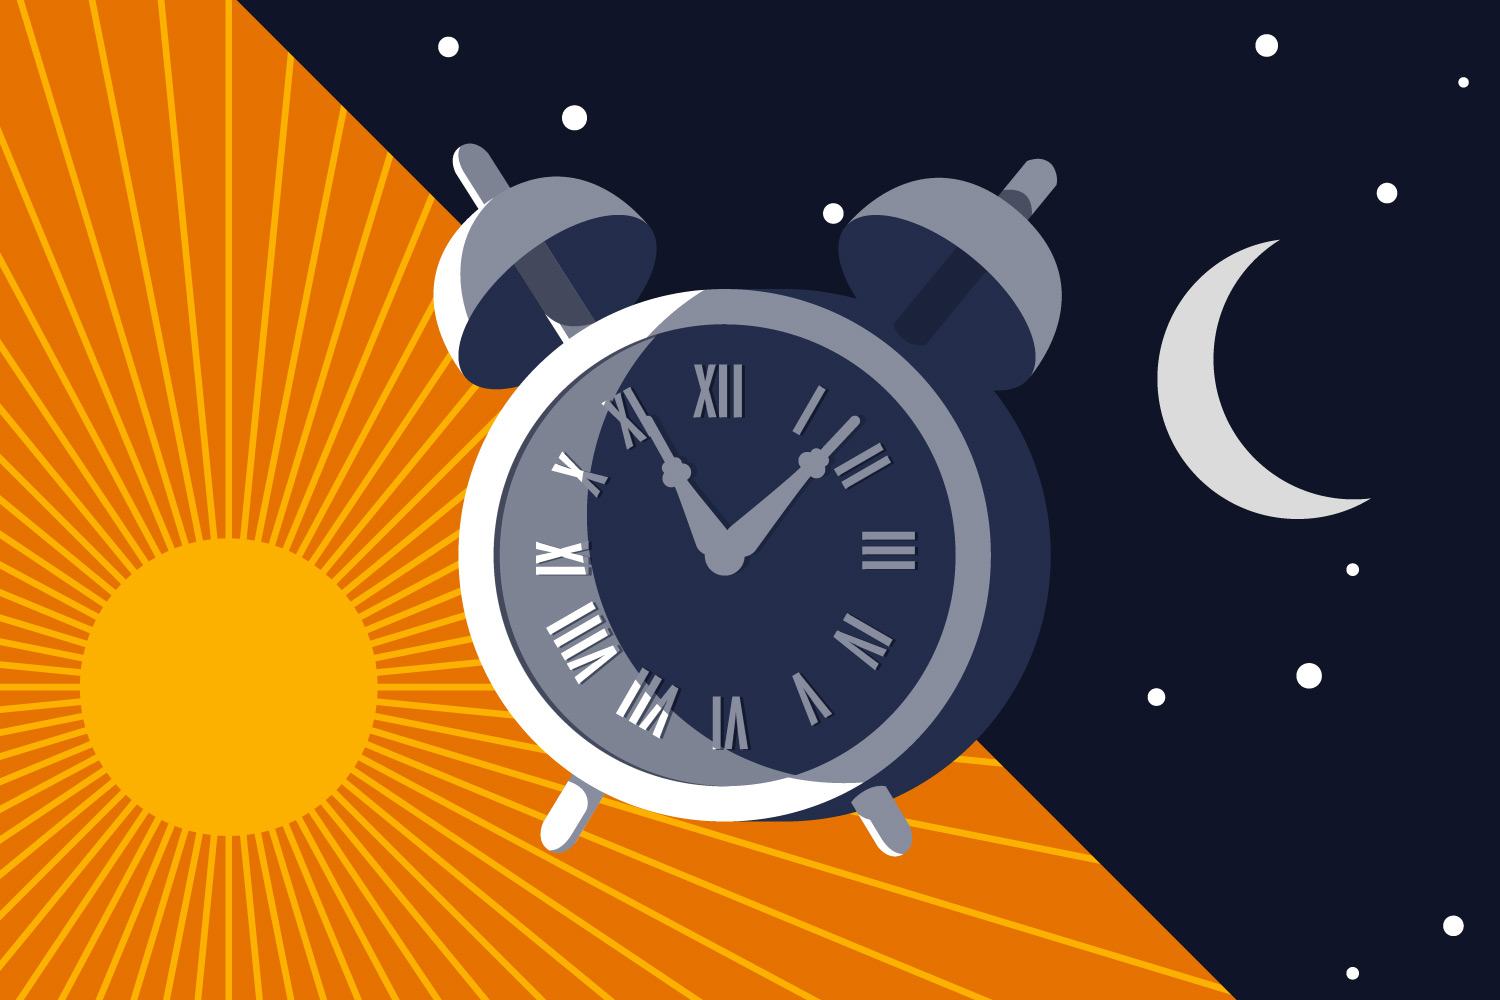 Illustration of a sun on the left and moon and stars on the right.  An alarm clock is in the middle